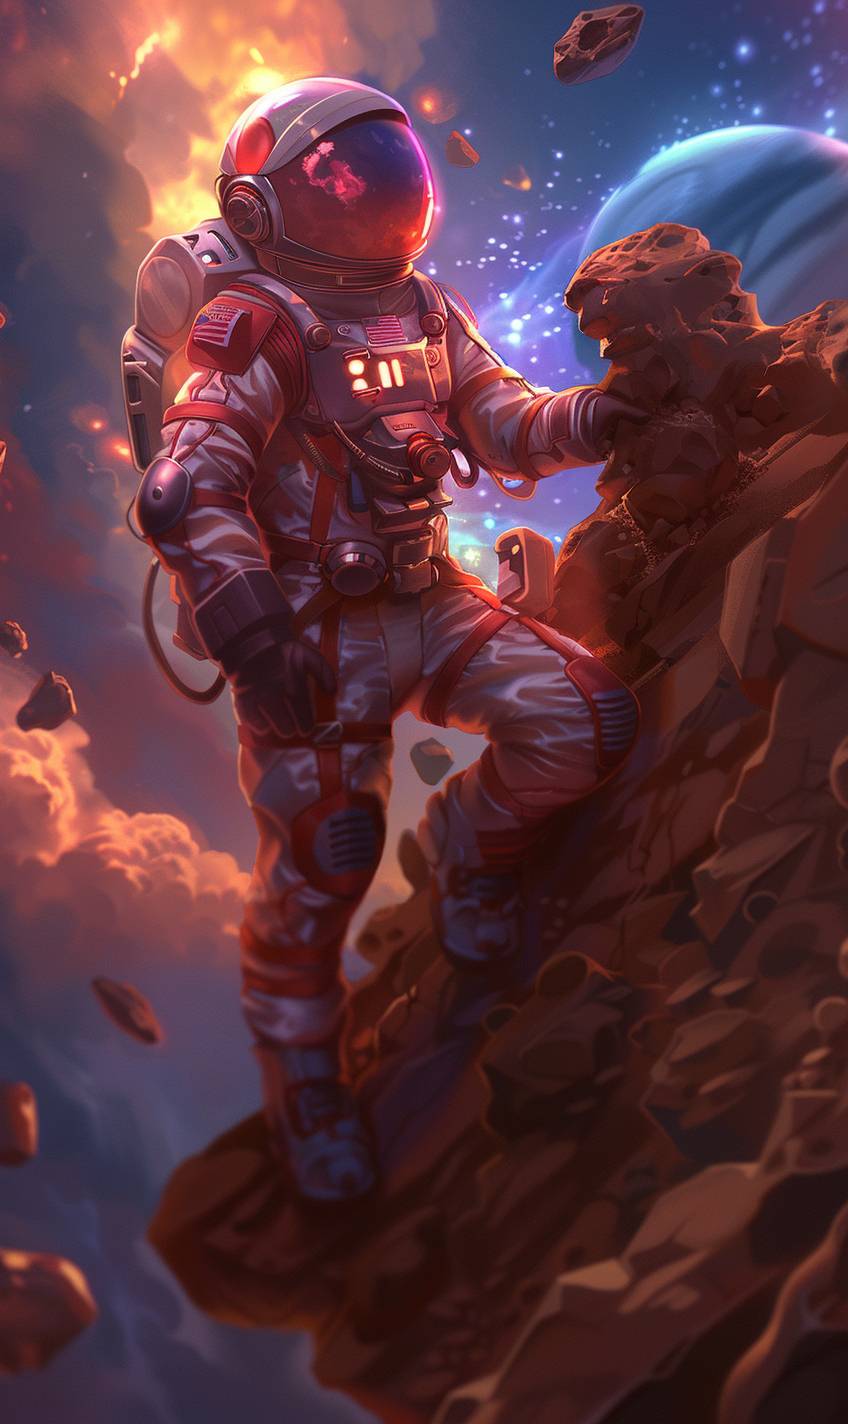 Astronaut exploring a distant planet, alien landscape with strange rock formations, a distant galaxy visible in the sky, high-tech suit